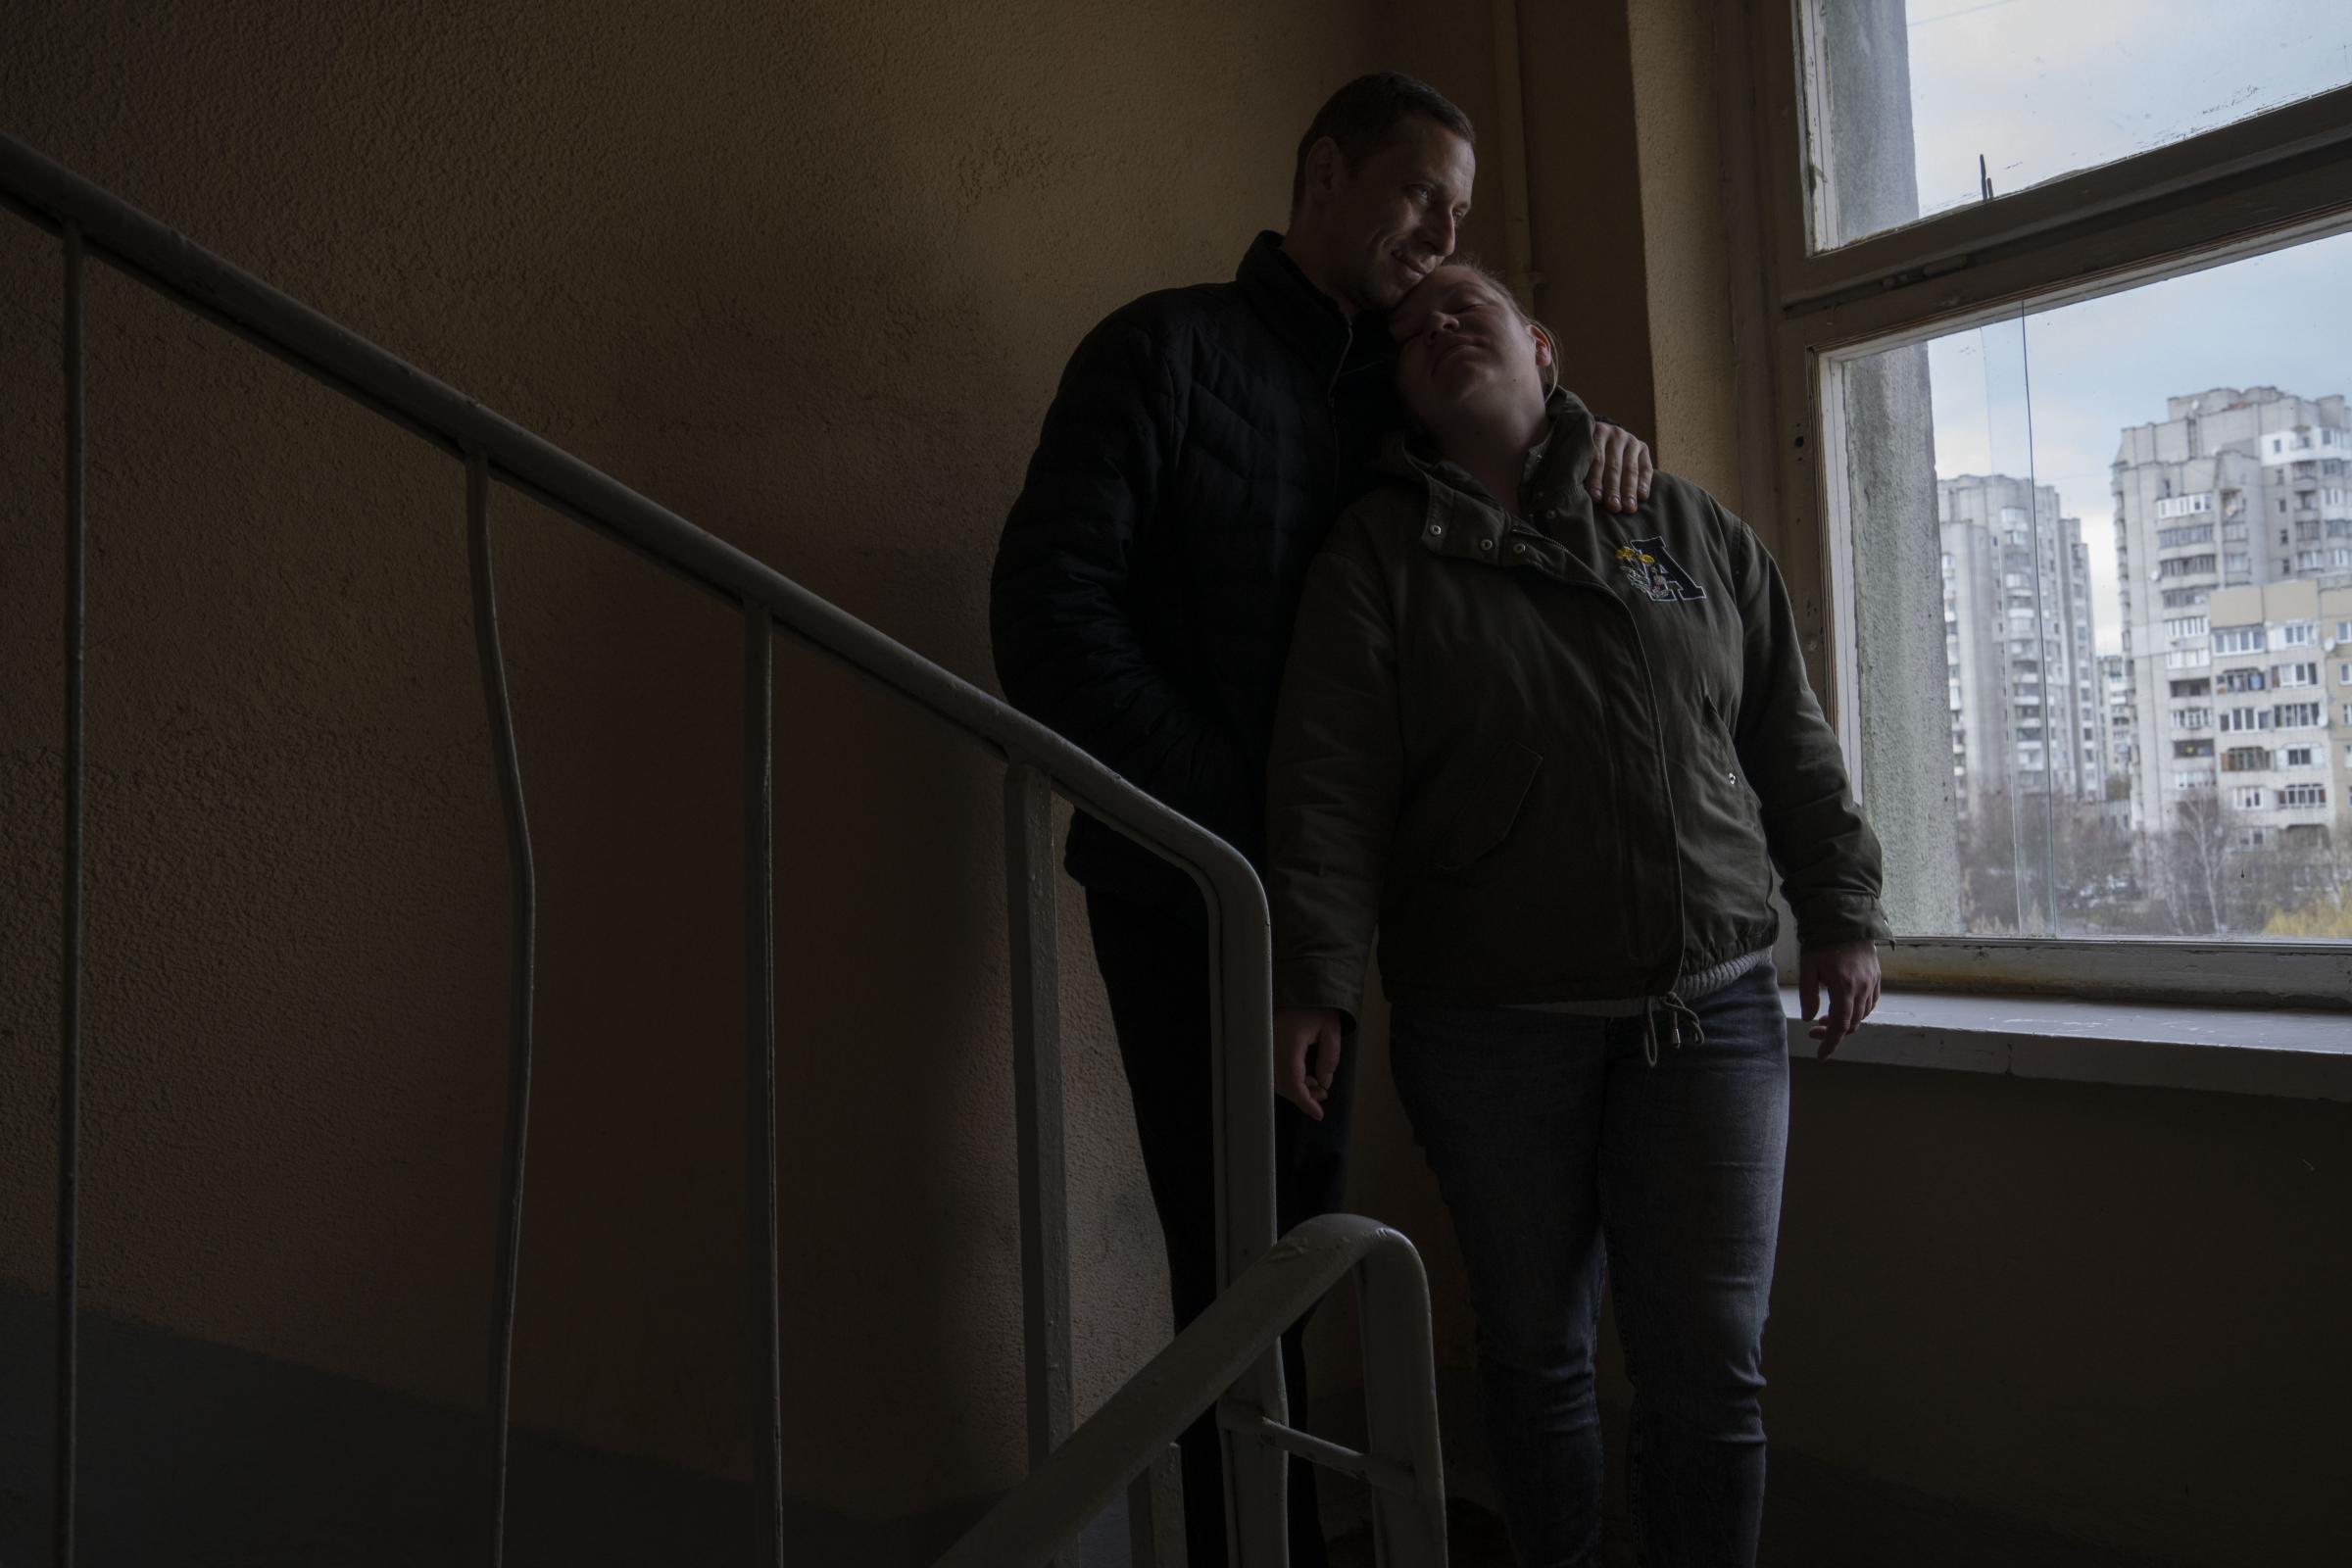 Stories of Ukraine's families during war - Iryna and Volodymyr, internally displaced from Irpin,...